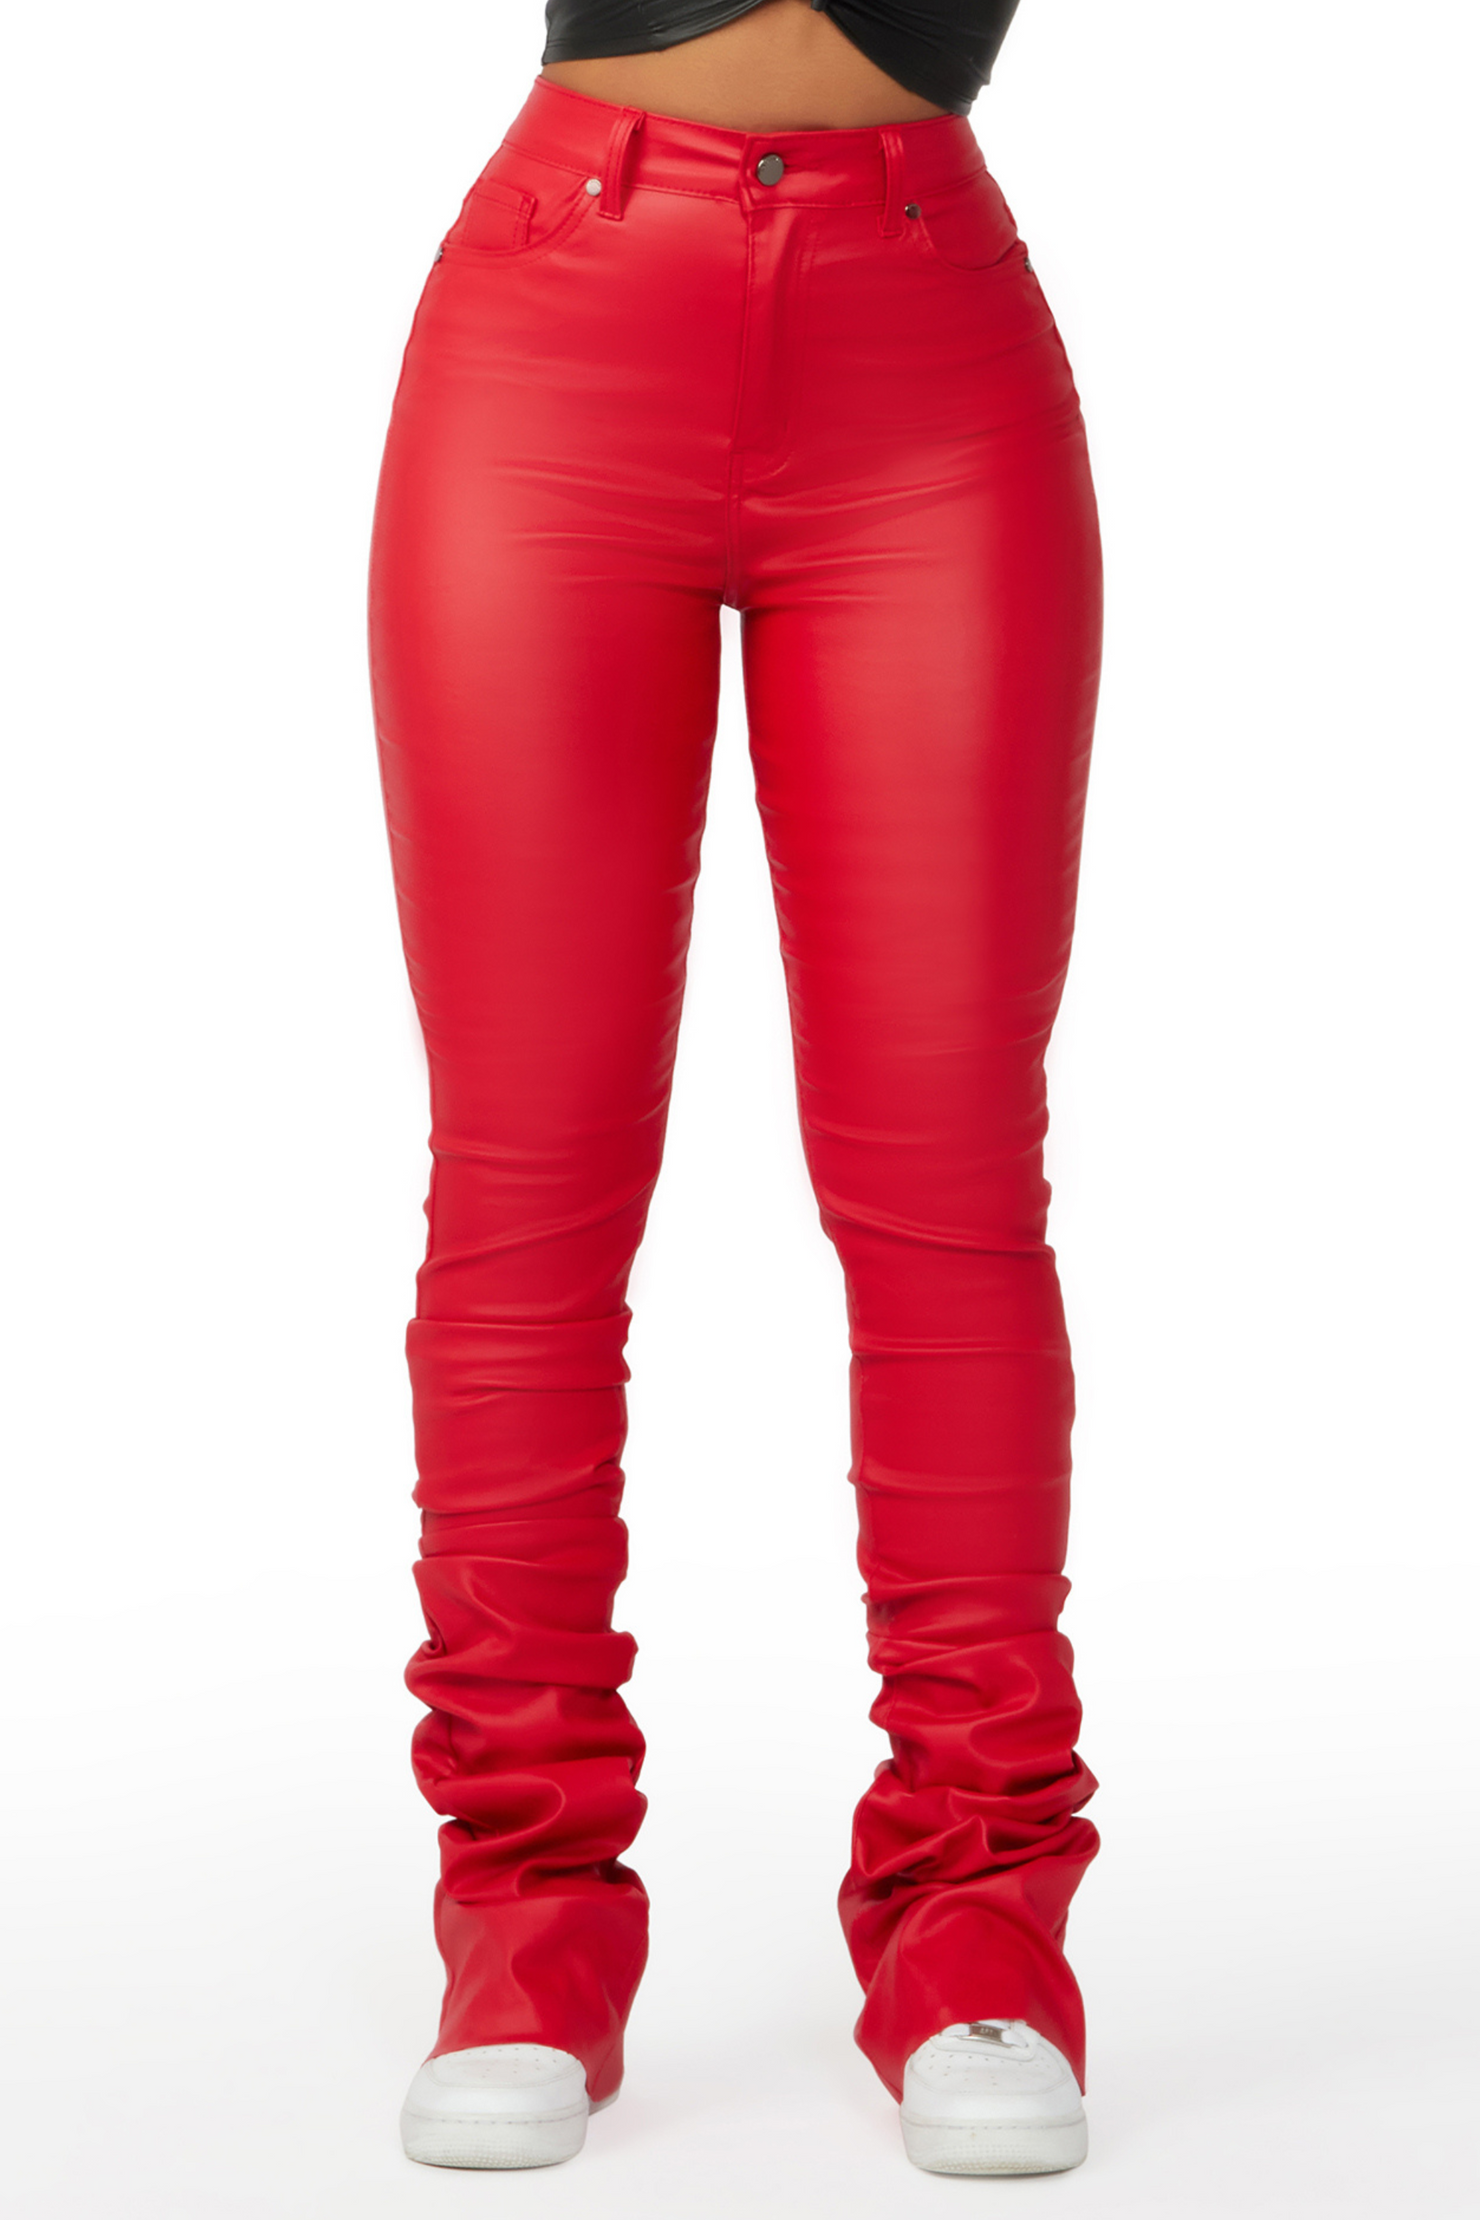  Red - Women's Jeans / Women's Clothing: Clothing, Shoes &  Accessories